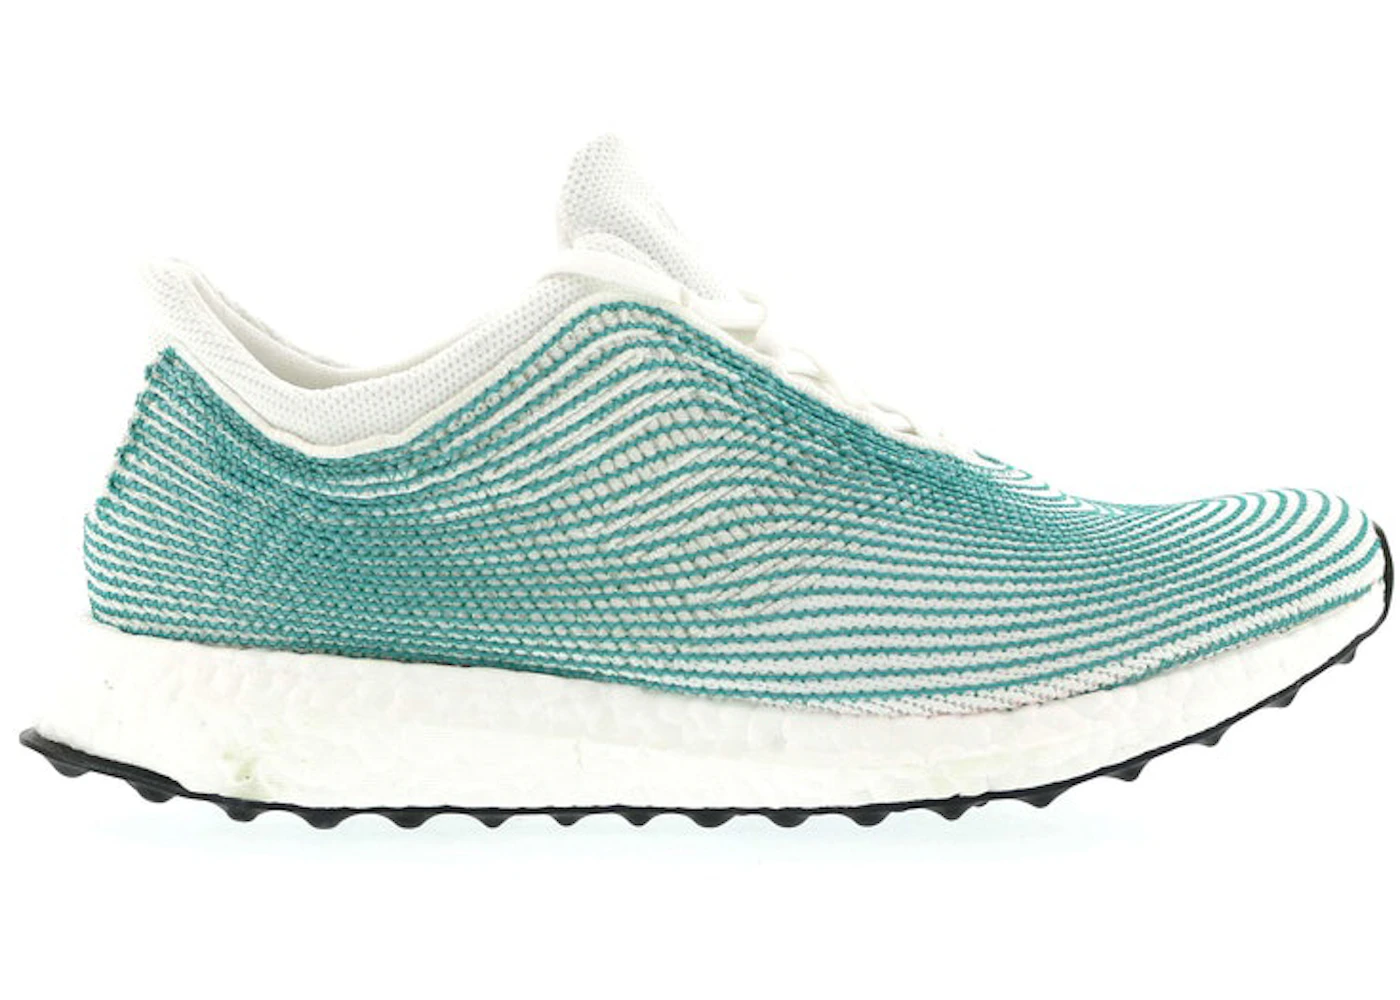 Belly Flare Human adidas Ultra Boost Uncaged Parley For the Oceans - BY2470 - US